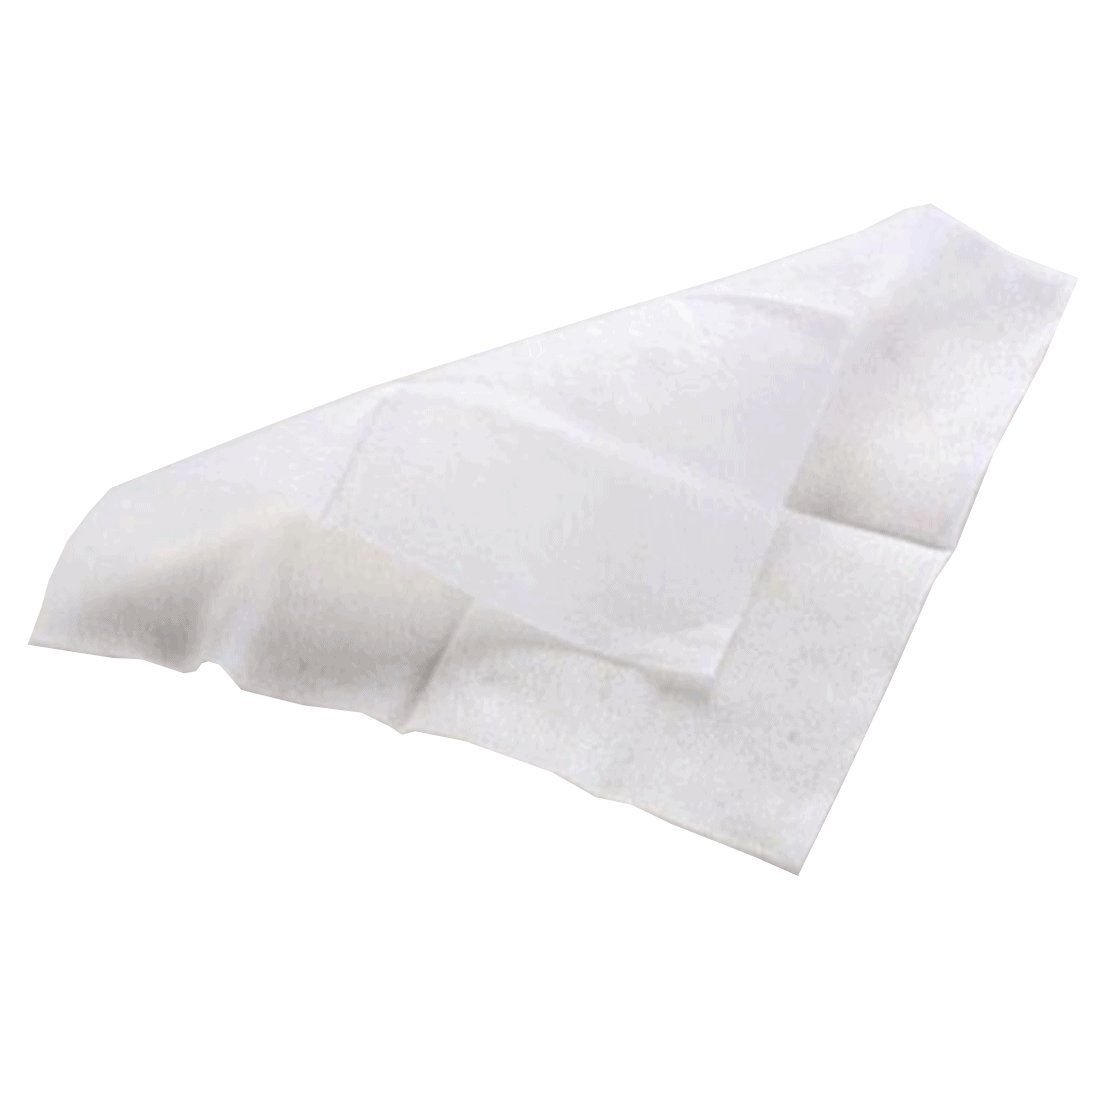 Hand and skin cleansing towelettes, individually wrapped